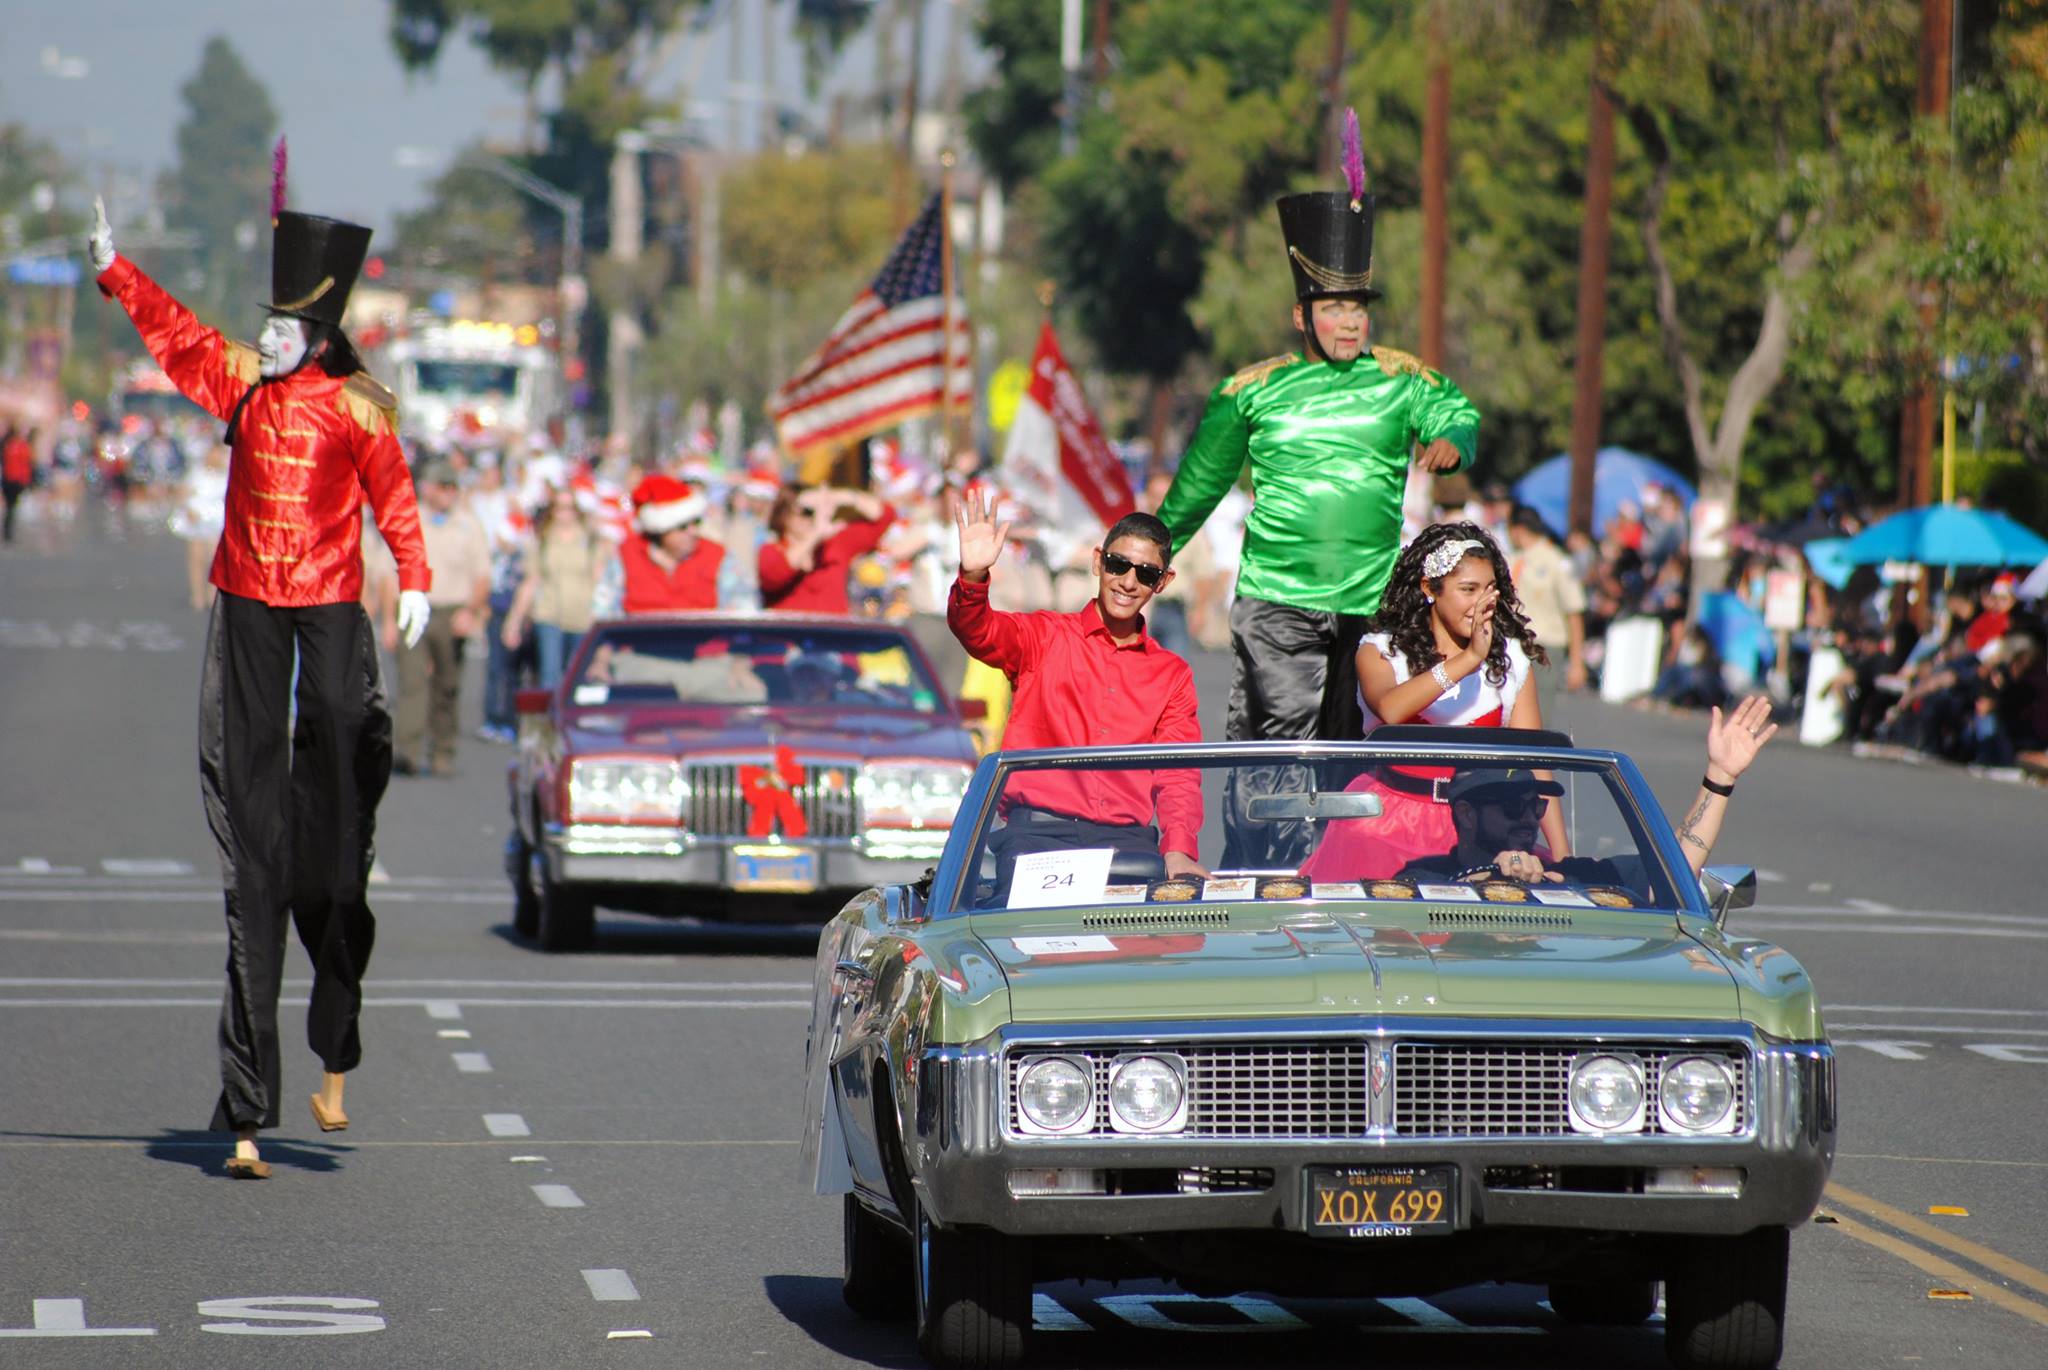 PHOTO GALLERY Downey Christmas Parade — The Downey Patriot